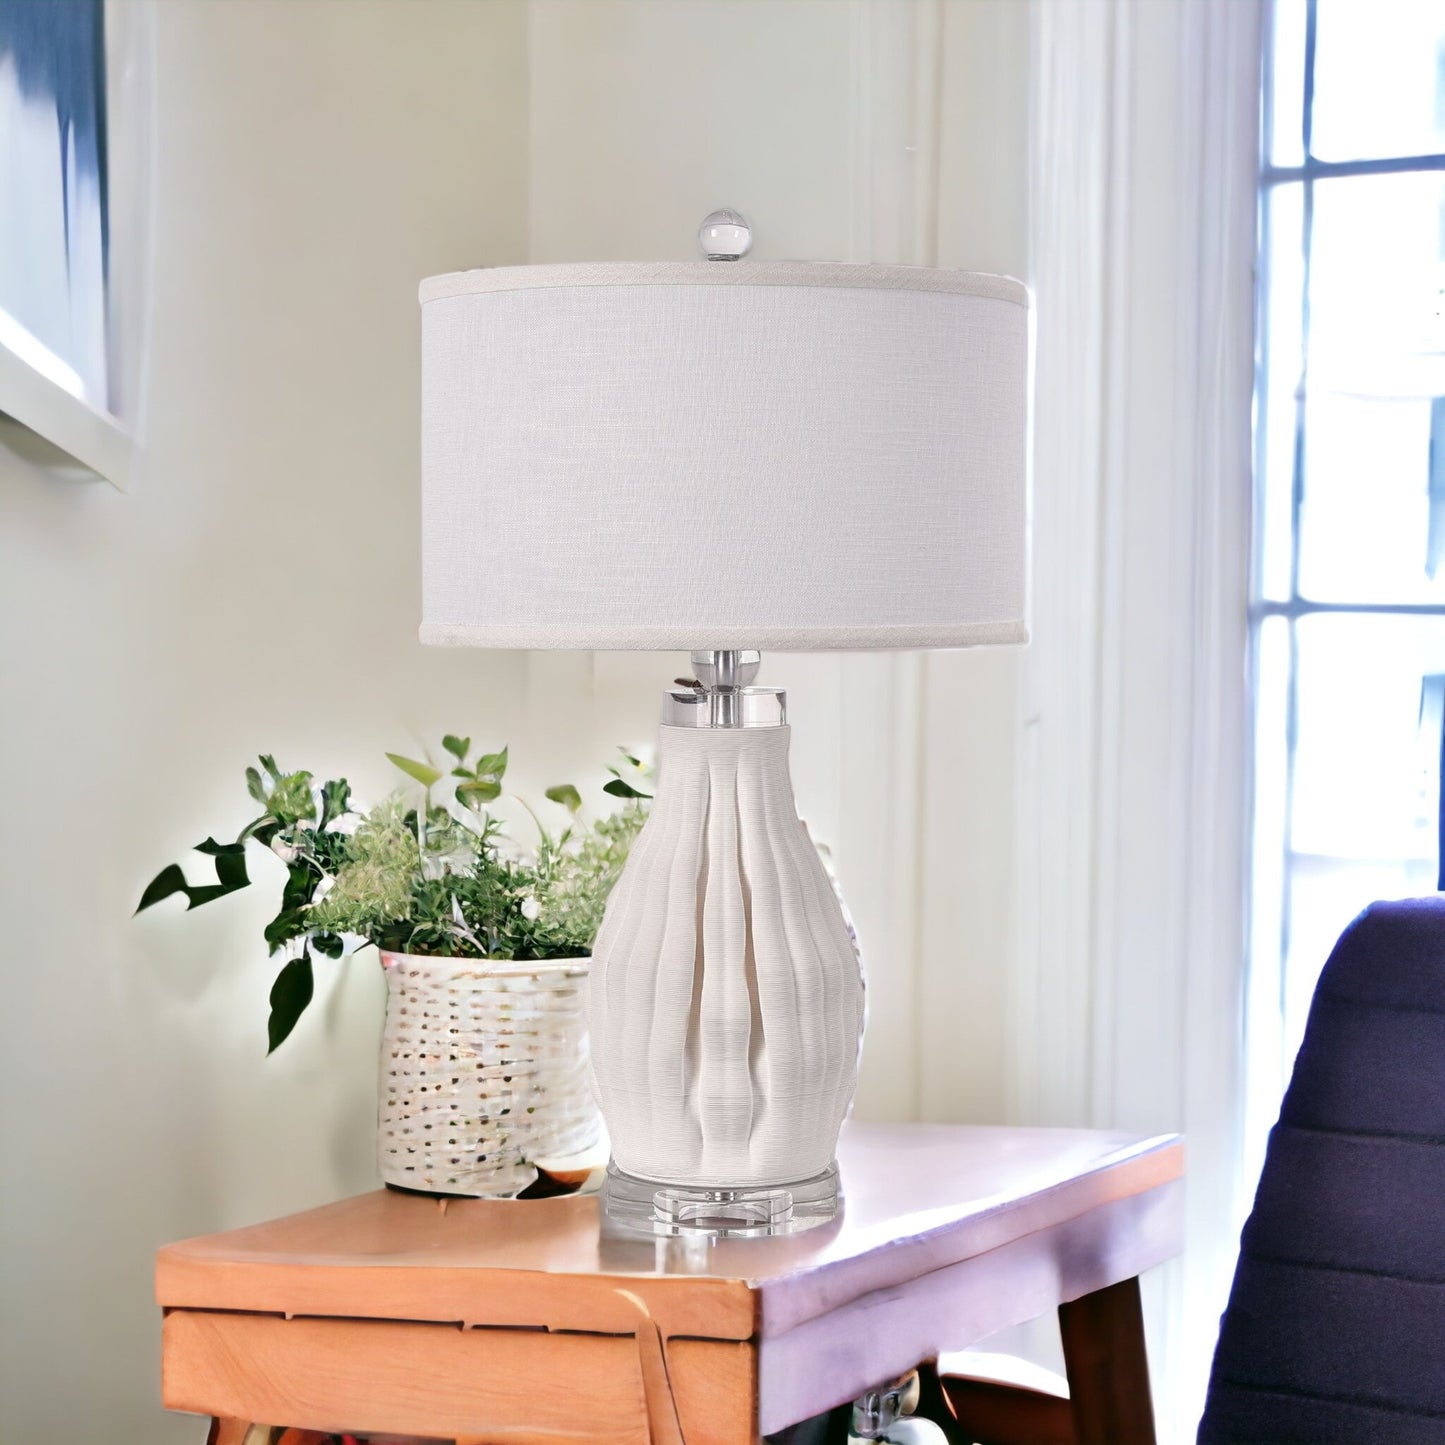 22" White Ceramic Bedside Table Lamp With White Drum Shade